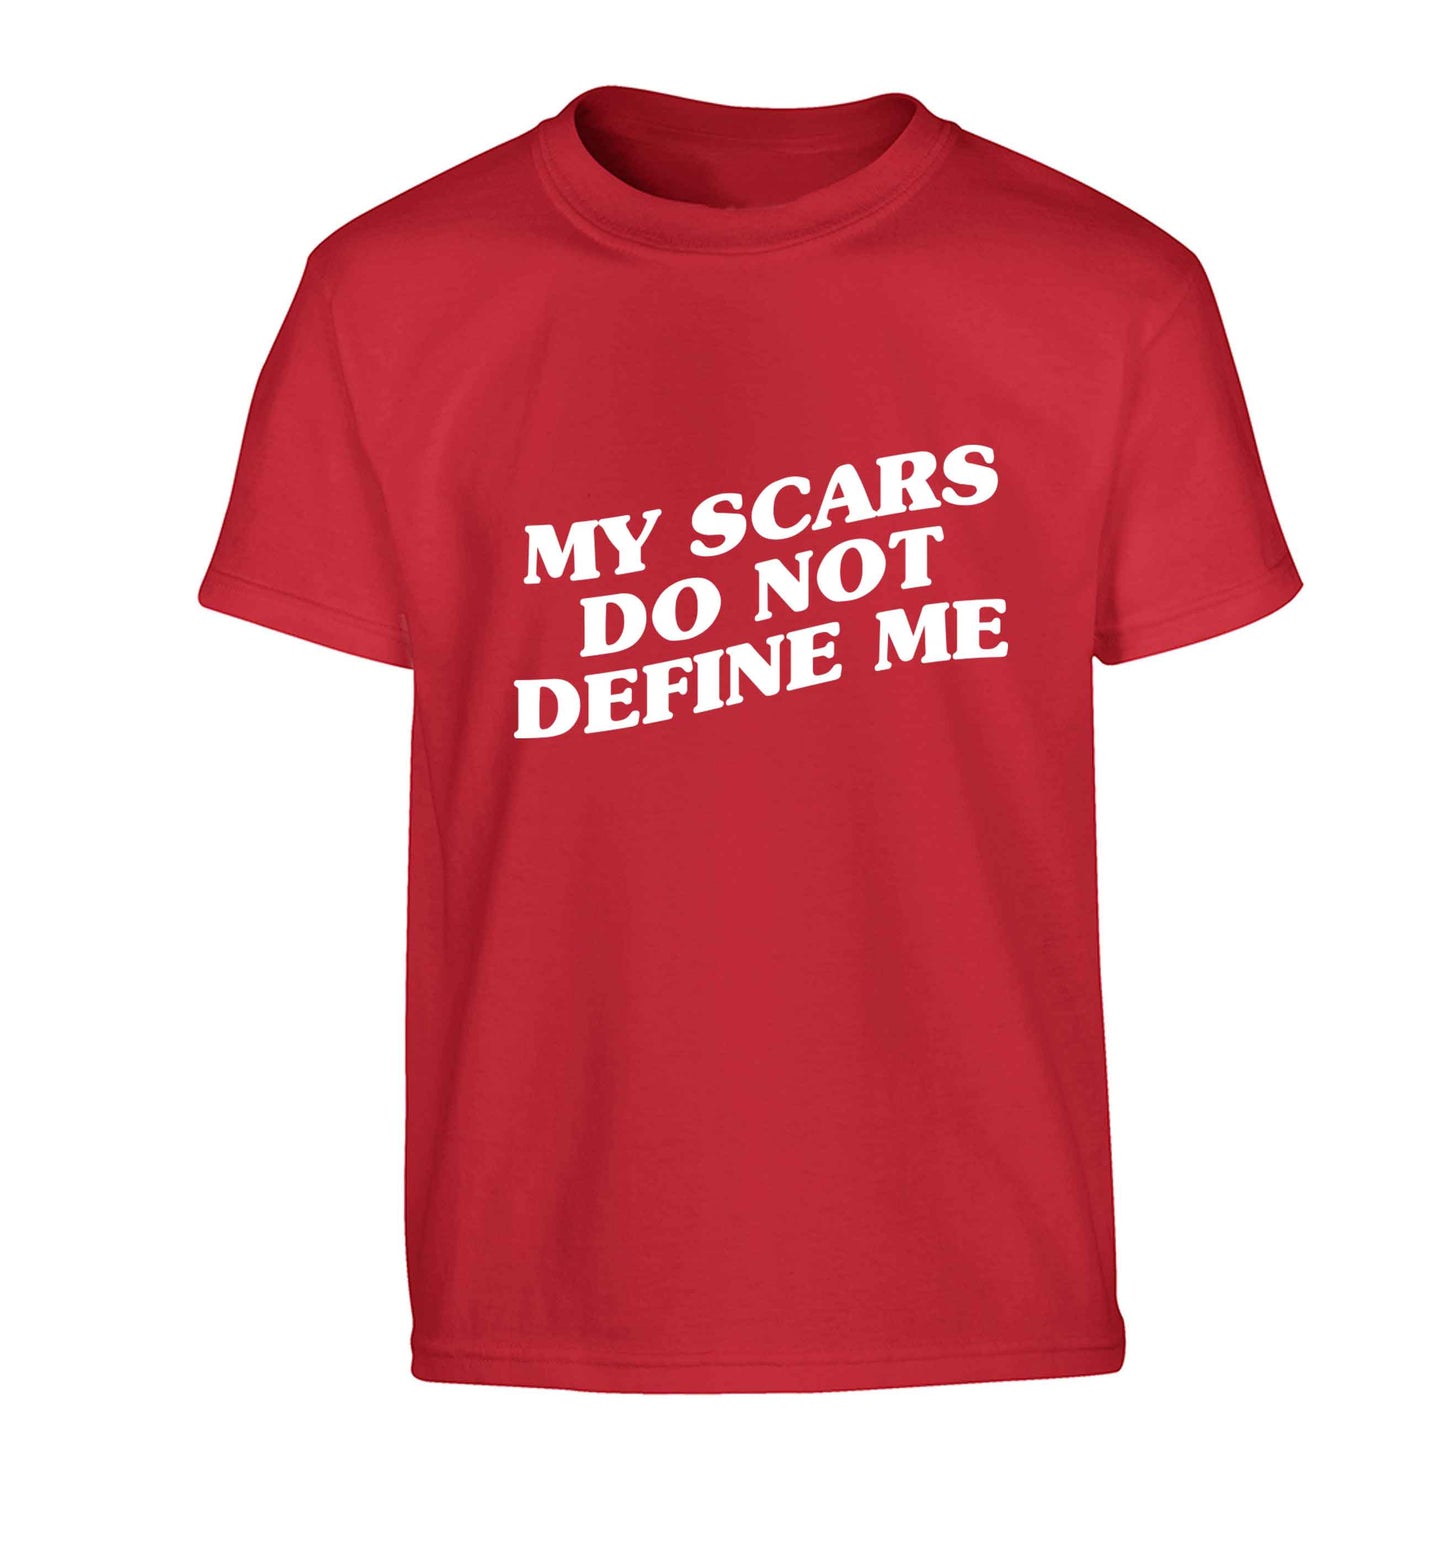 My scars do not define me Children's red Tshirt 12-13 Years